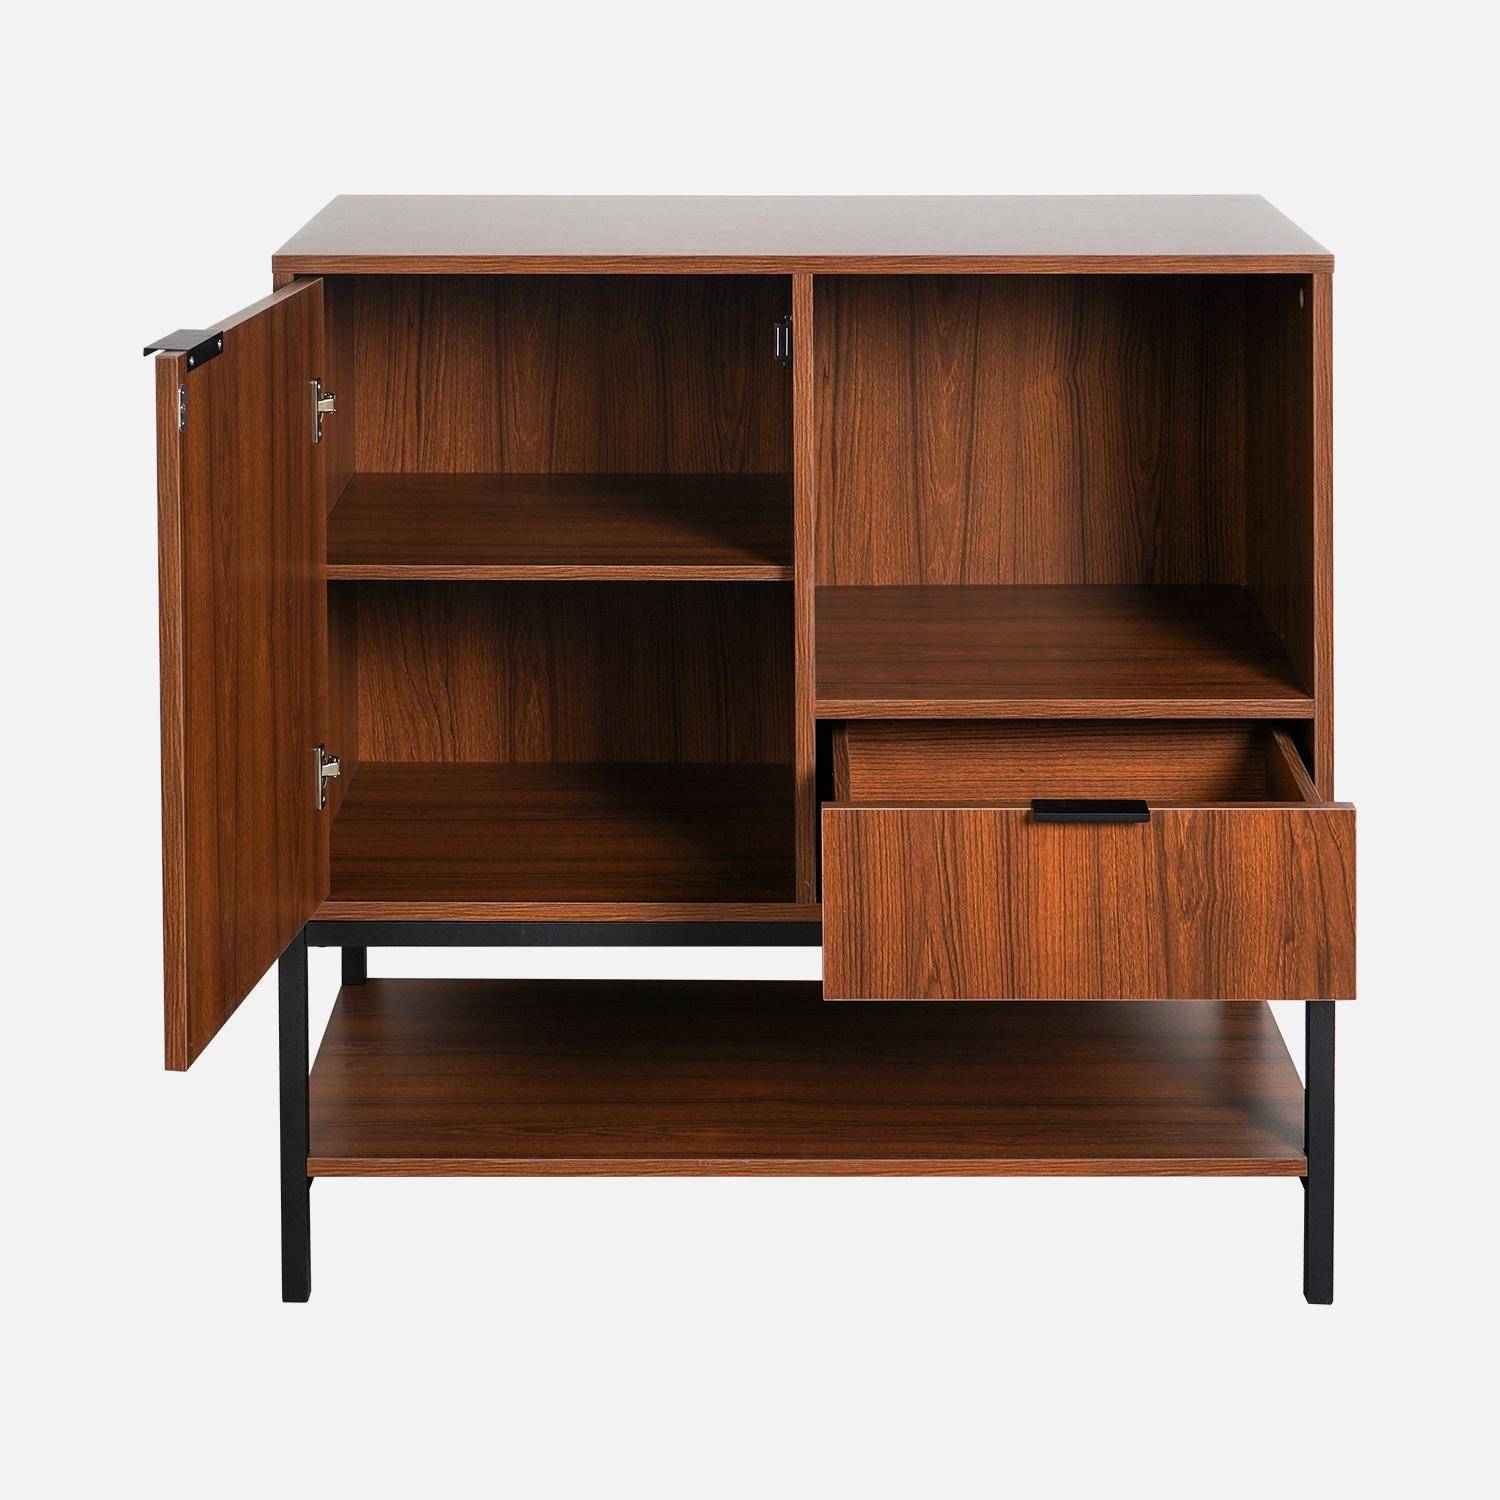 Low sideboard in walnut with black metal legs and handles - 1 door, 1 drawer and 2 shelves Photo5